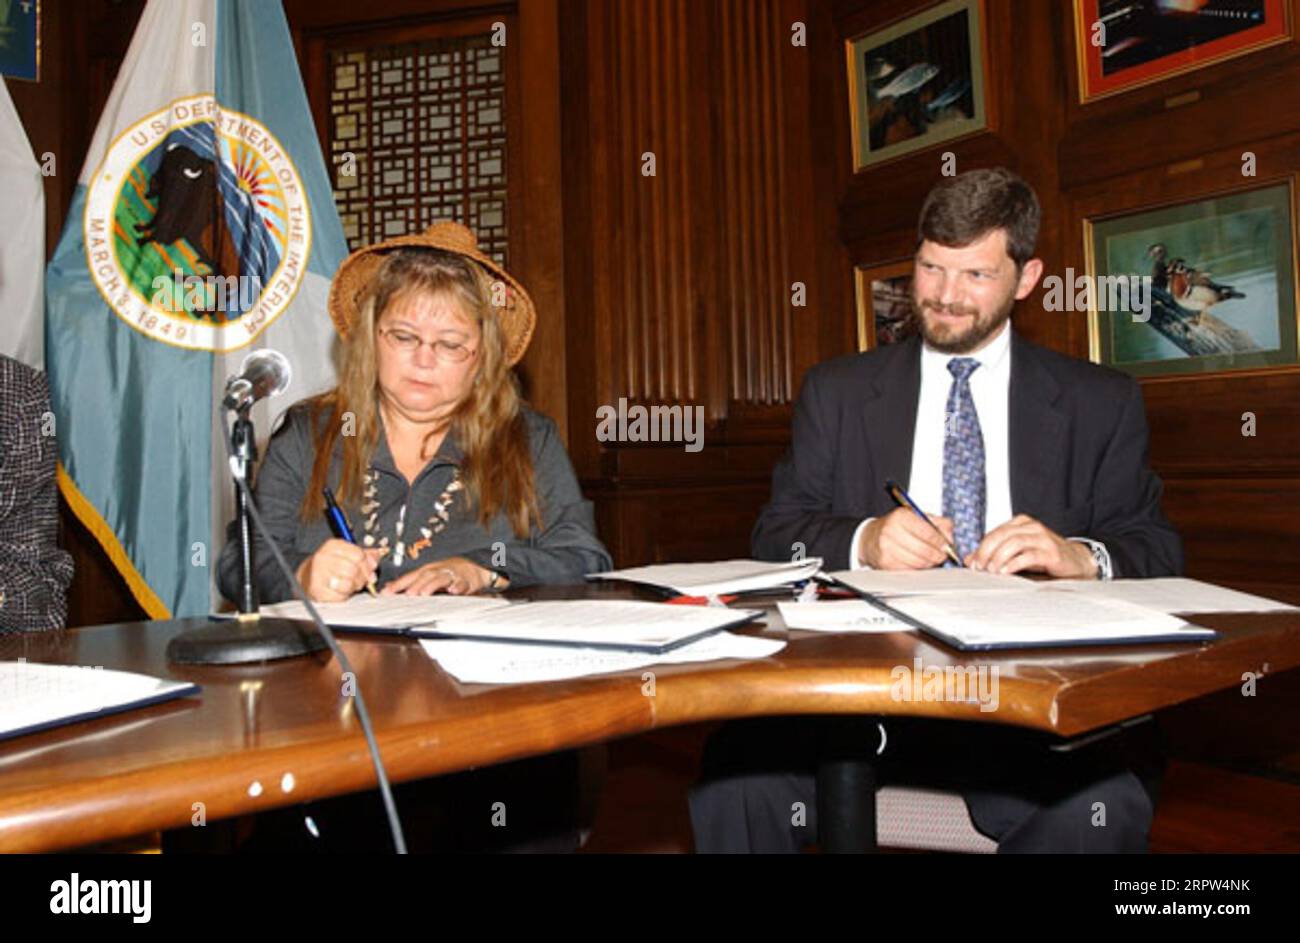 President of the Quinault Indian Nation, Pearl Capoeman-Baller, and Senior Vice President of Trust for Public Land, Alan Front, left to right, at Department of Interior headquarters signing event for agreement protecting forest habitat of marbled murrelet on Quinault Reservation land in Washington state Stock Photo